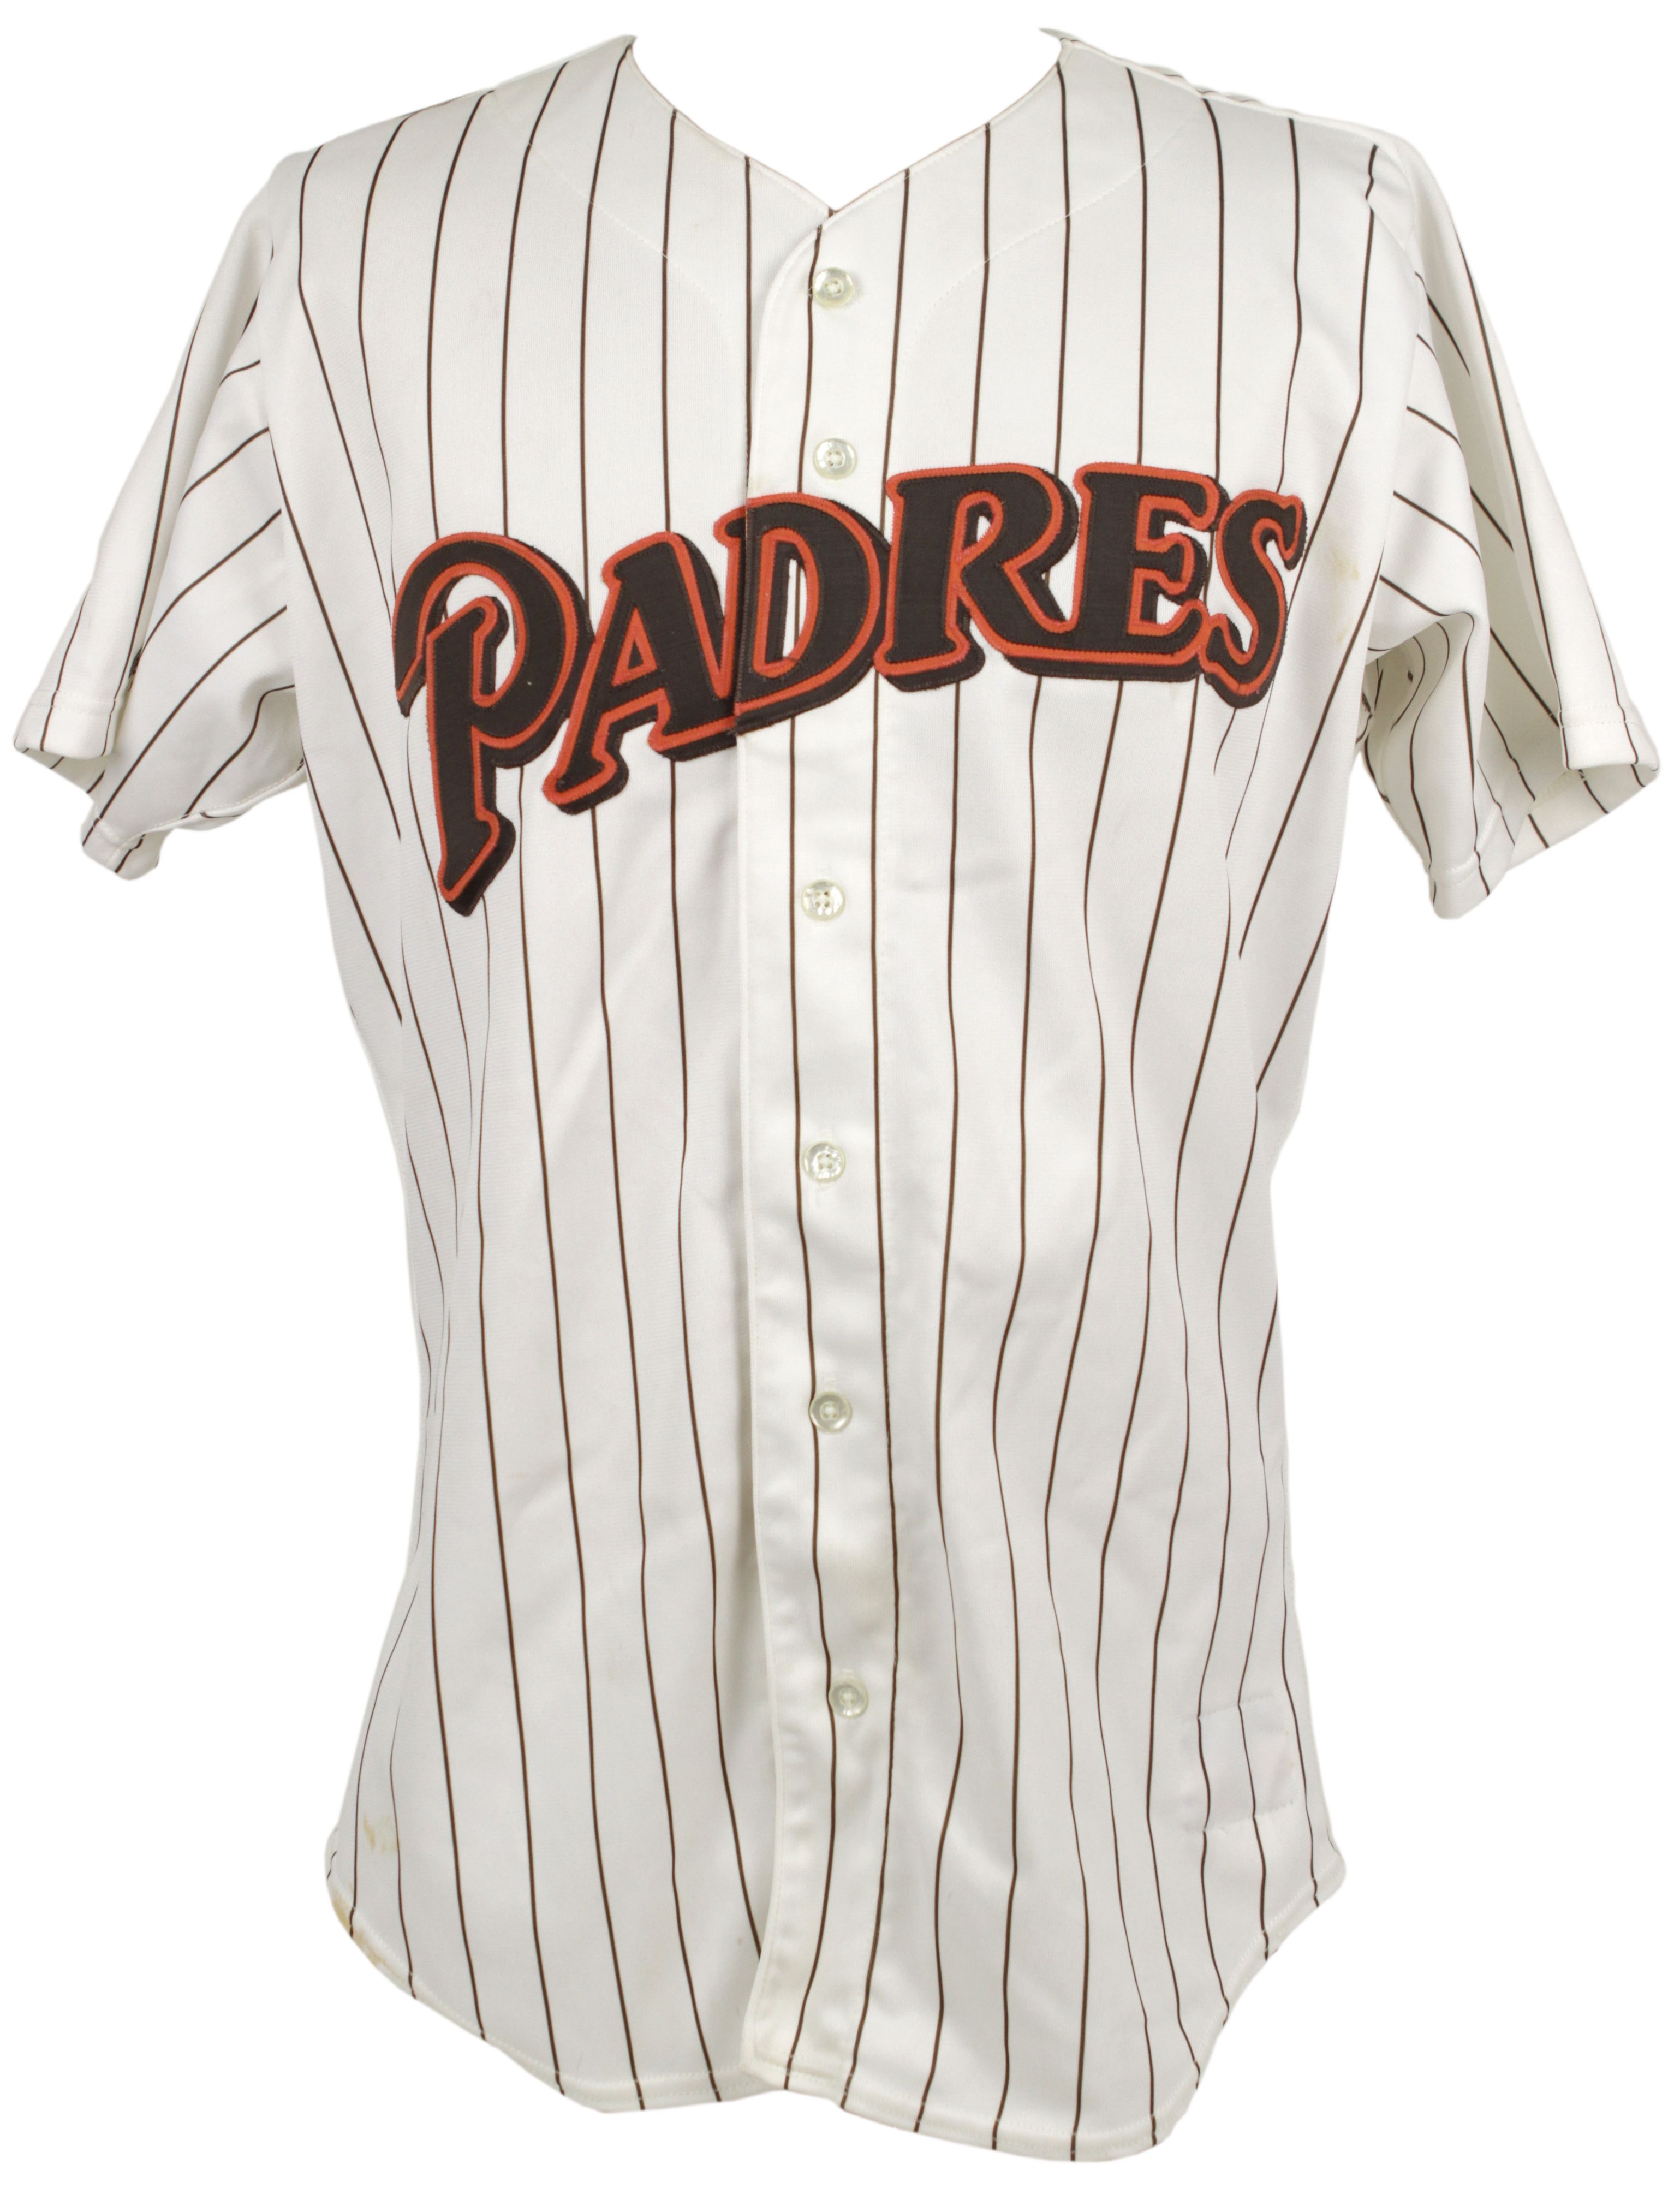 San Diego Padres on X: The Padres' Pacific Coast League game-worn